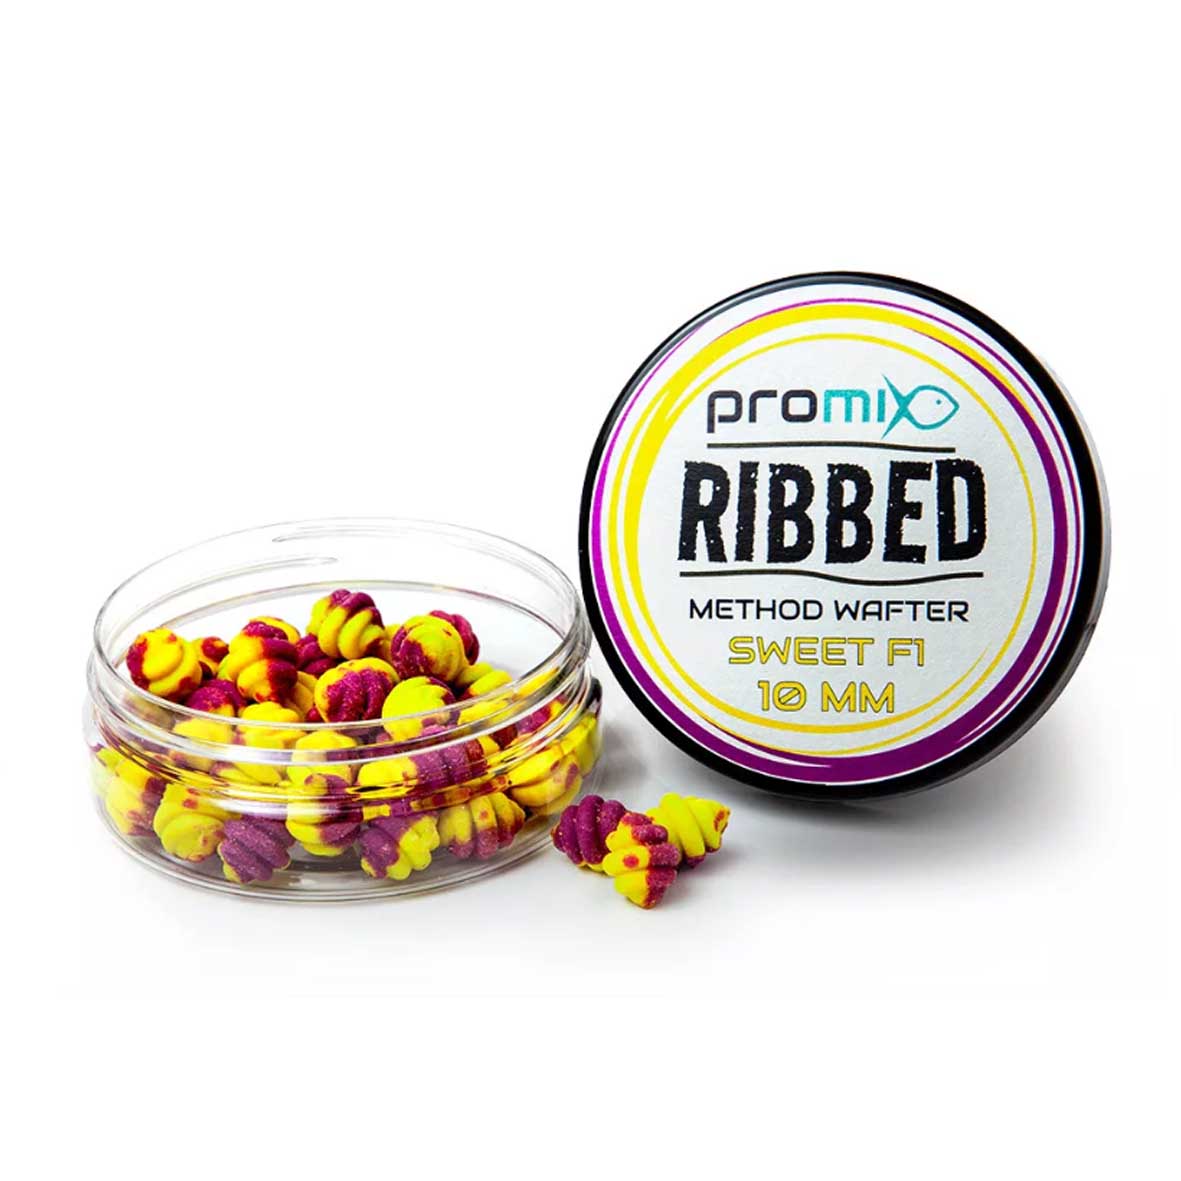 Promix Ribbed Method Wafter Sweet F1 10mm